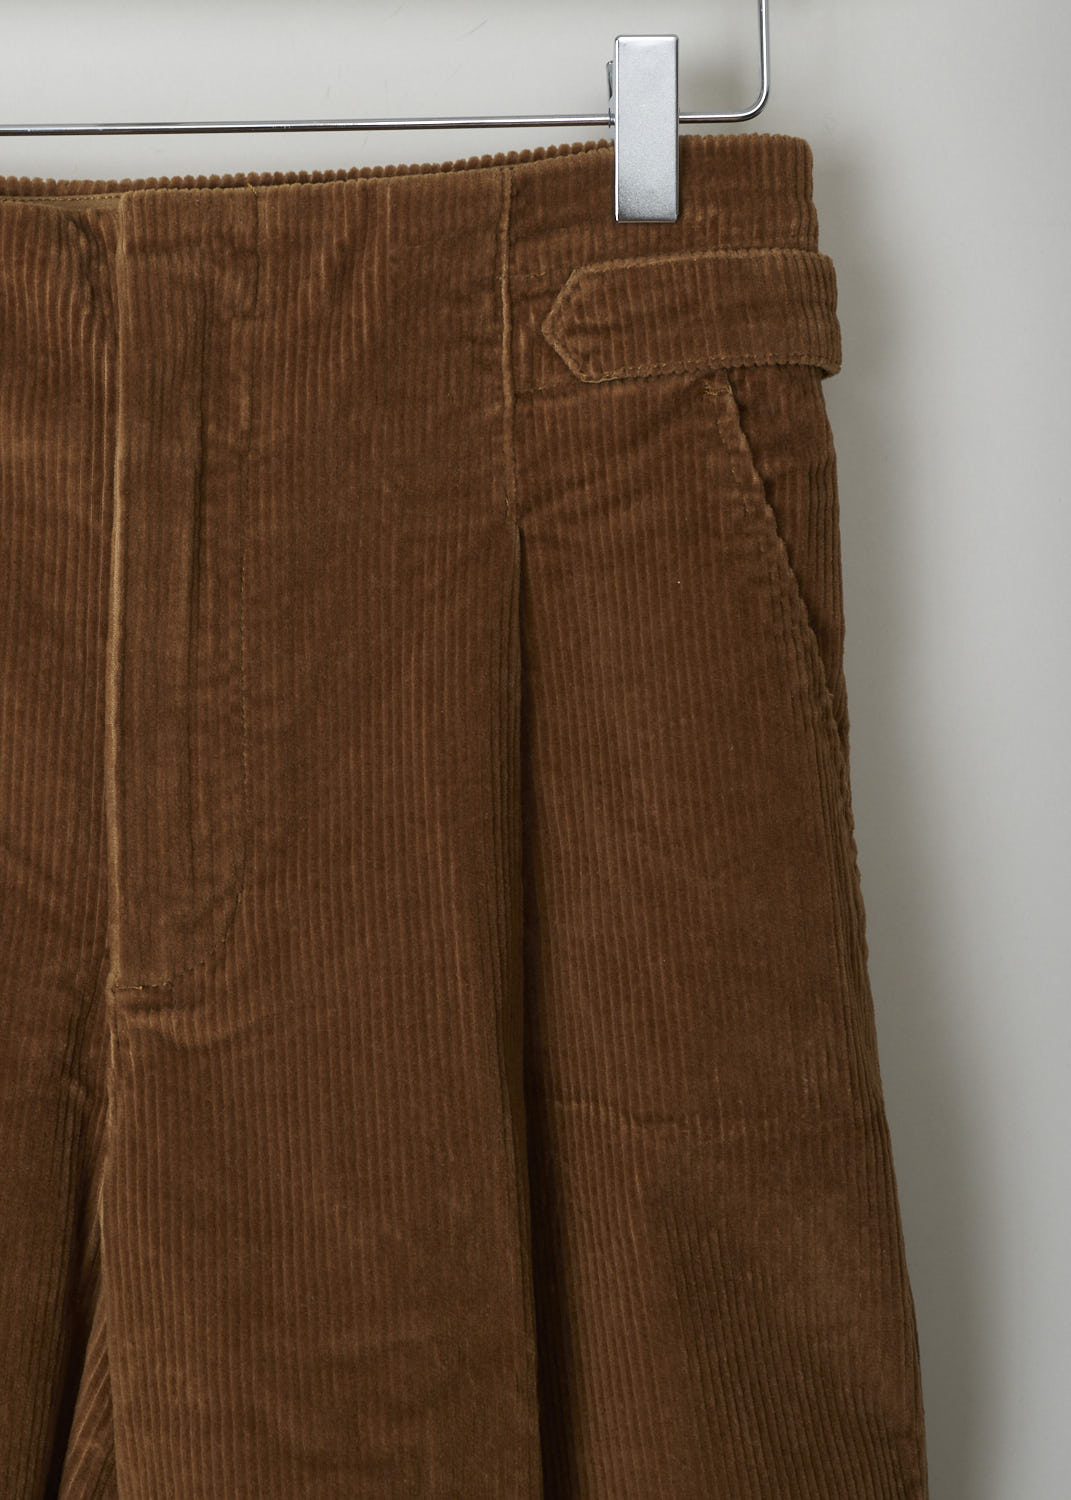 CLOSED, BROWN CORDUROY TROUSERS, C91044_38W_20_928, Brown, Detail, These brown corduroy trousers feature a concealed zip and button closure. In the front, these trousers have slanted pockets. The tapered pants legs with a folded hem. 
